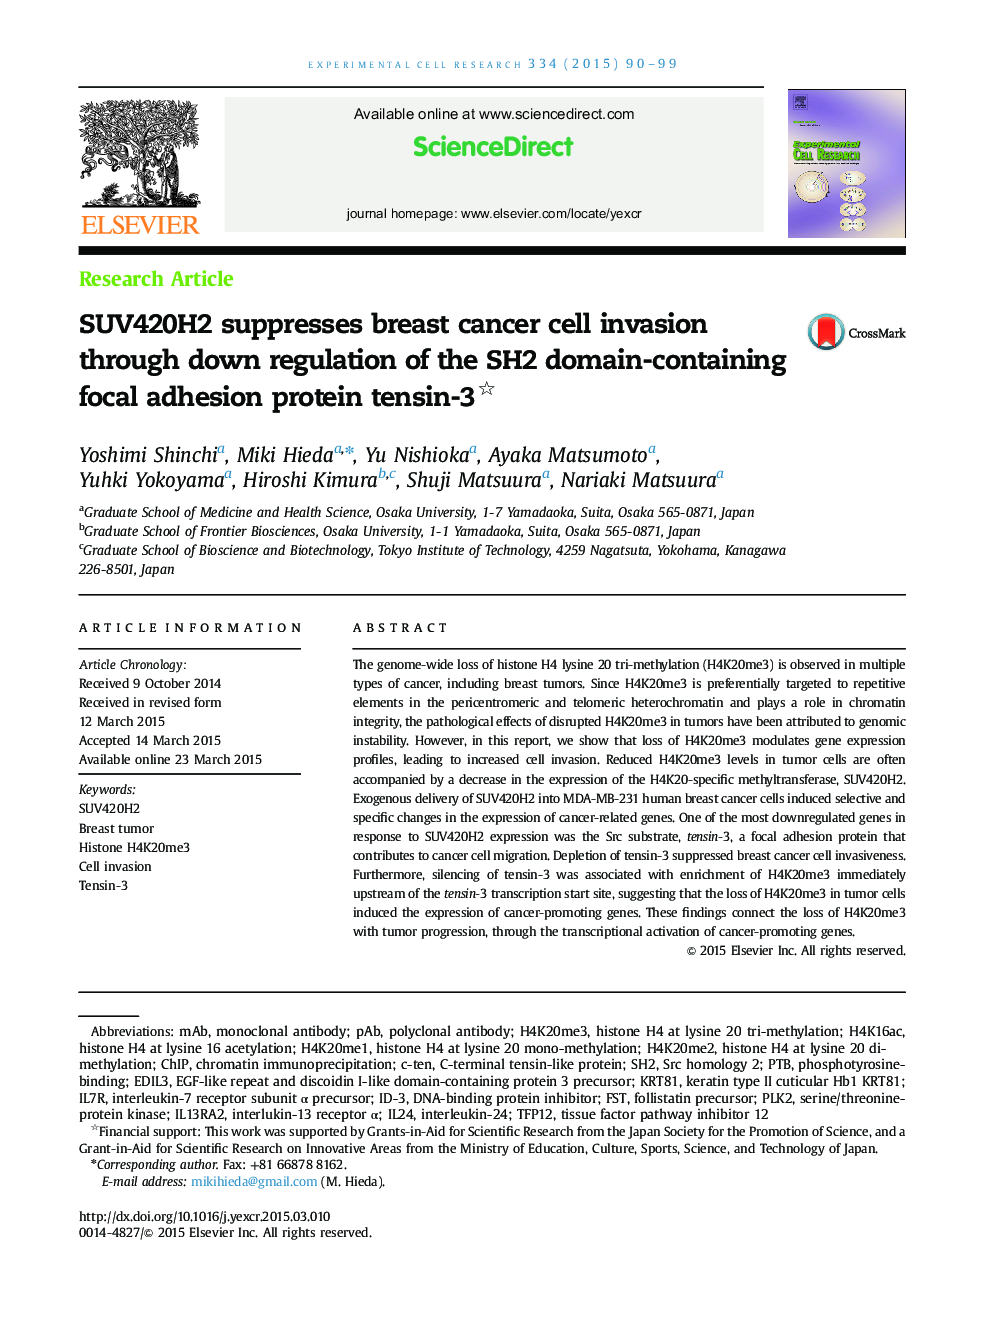 SUV420H2 suppresses breast cancer cell invasion through down regulation of the SH2 domain-containing focal adhesion protein tensin-3